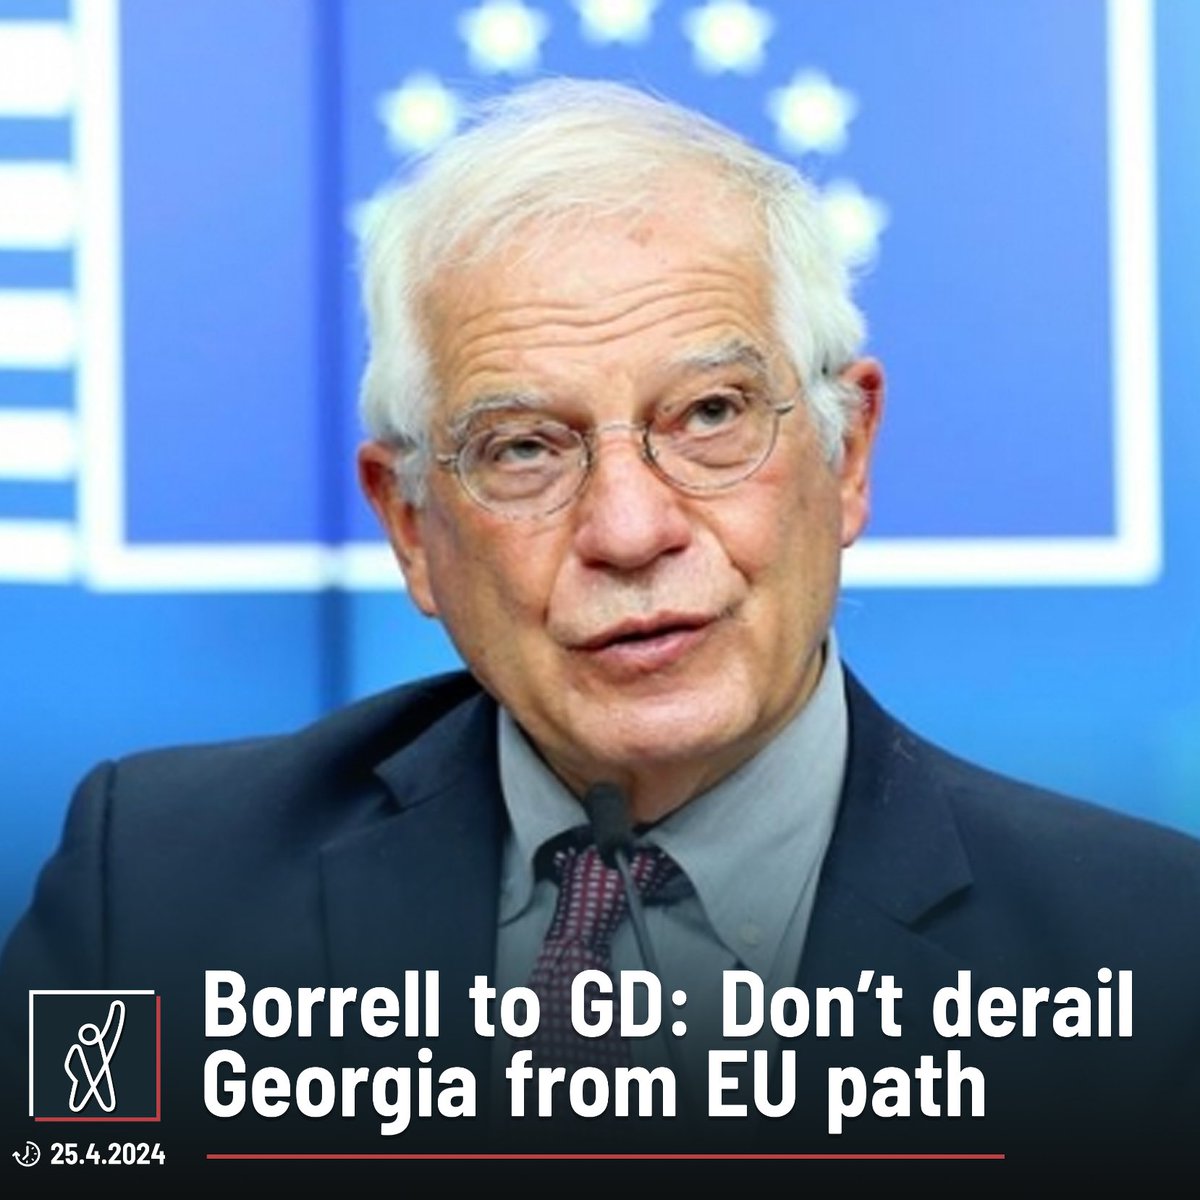 “We have seen impressive scenes from Georgia last year already. Citizens of all ages holding Georgian and European flags showing their strong attachment to democracy, to our shared European values and to Georgia’s path towards the European Union. At the time, the ruling party and